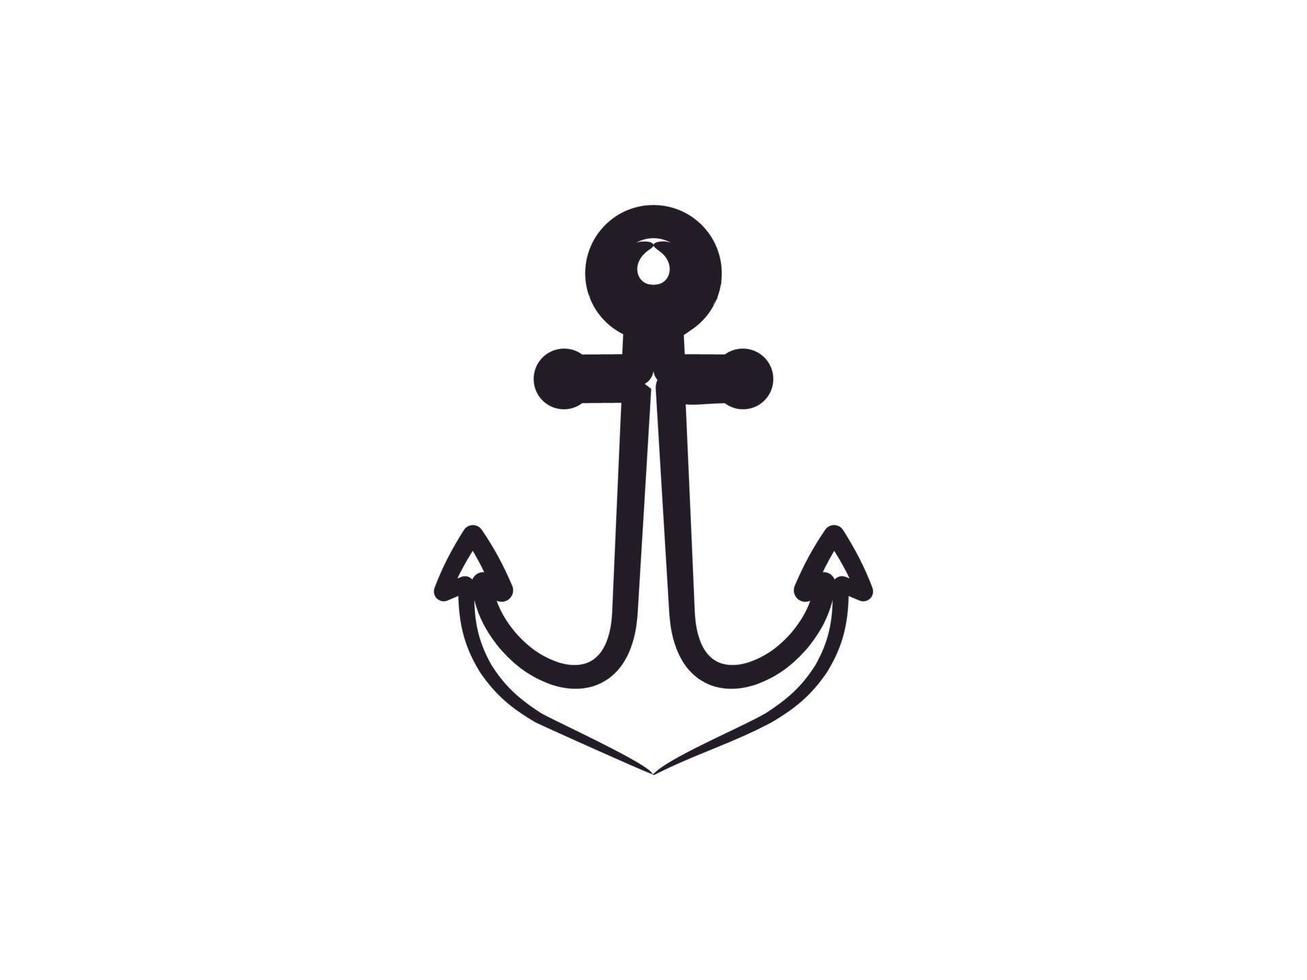 Anchor Rustic Hand Drawn Vintage Retro Hipster simple logo design for ...